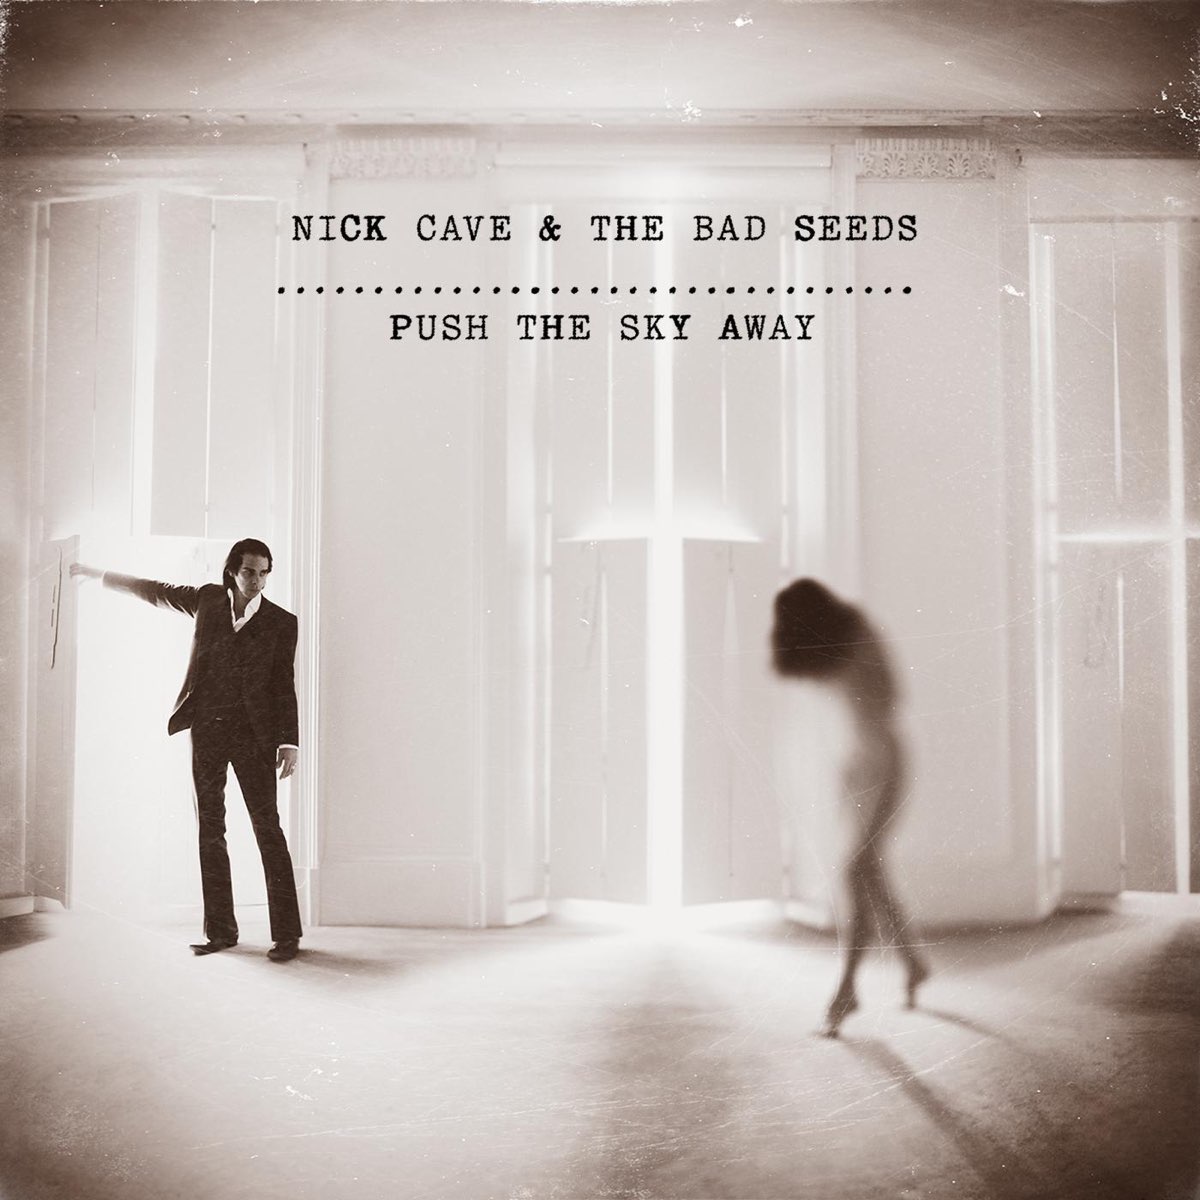 ‎Push the Sky Away by Nick Cave & The Bad Seeds on Apple Music